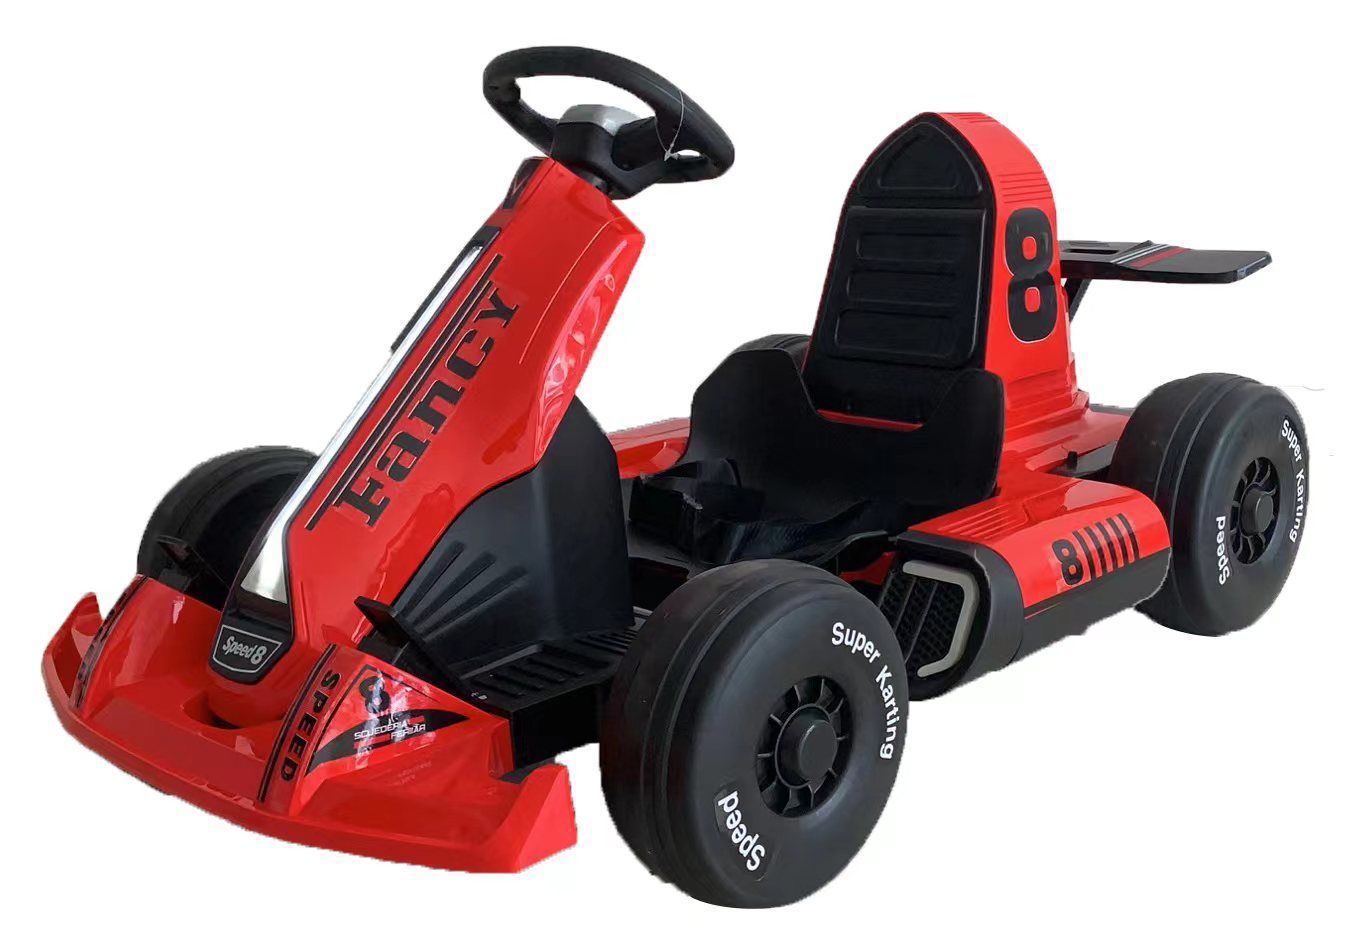 Fancy Electric Go Kart For Kids 12V Battery Powered Ride-On Cars With Remote Control